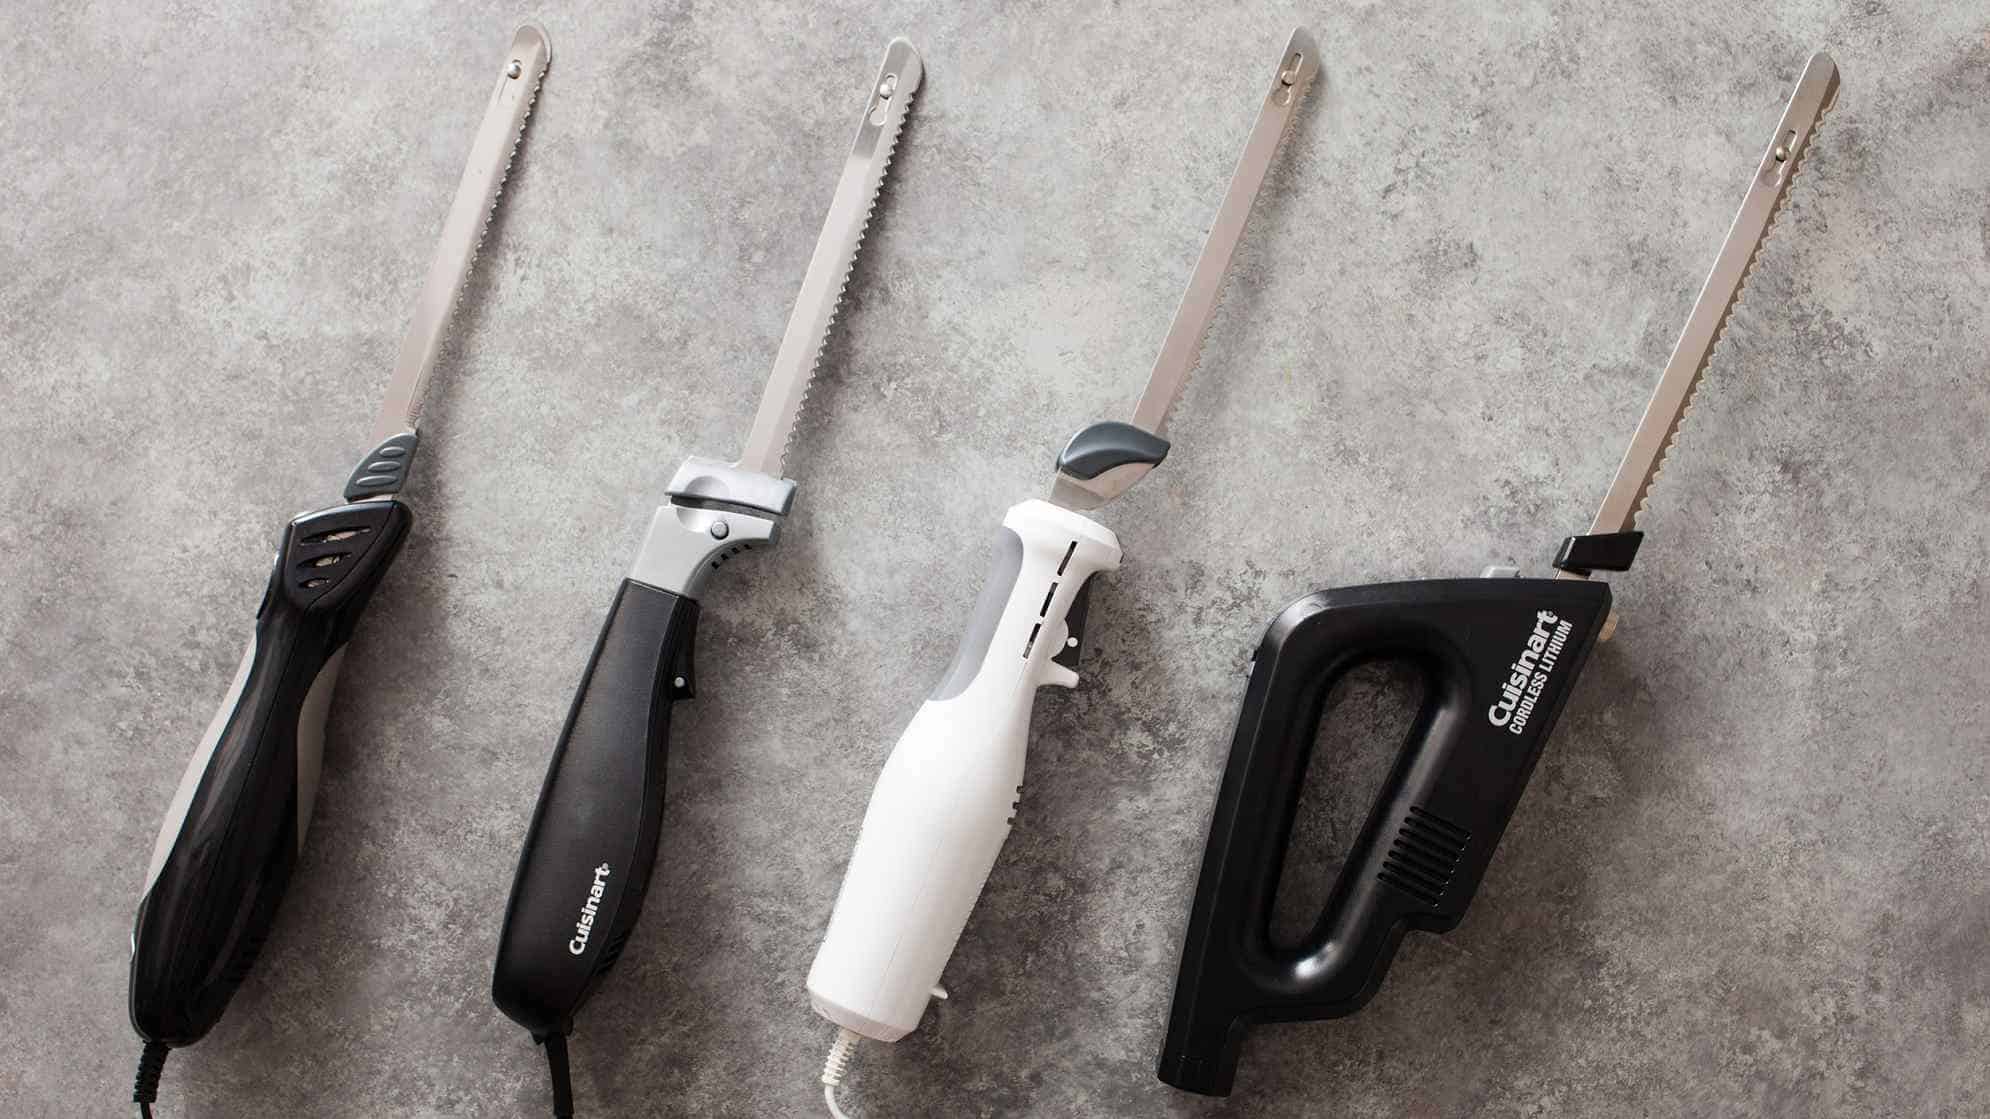 https://static.thedaringkitchen.com/wp-content/uploads/2020/10/37425_can-electric-knives-0066-1.jpg